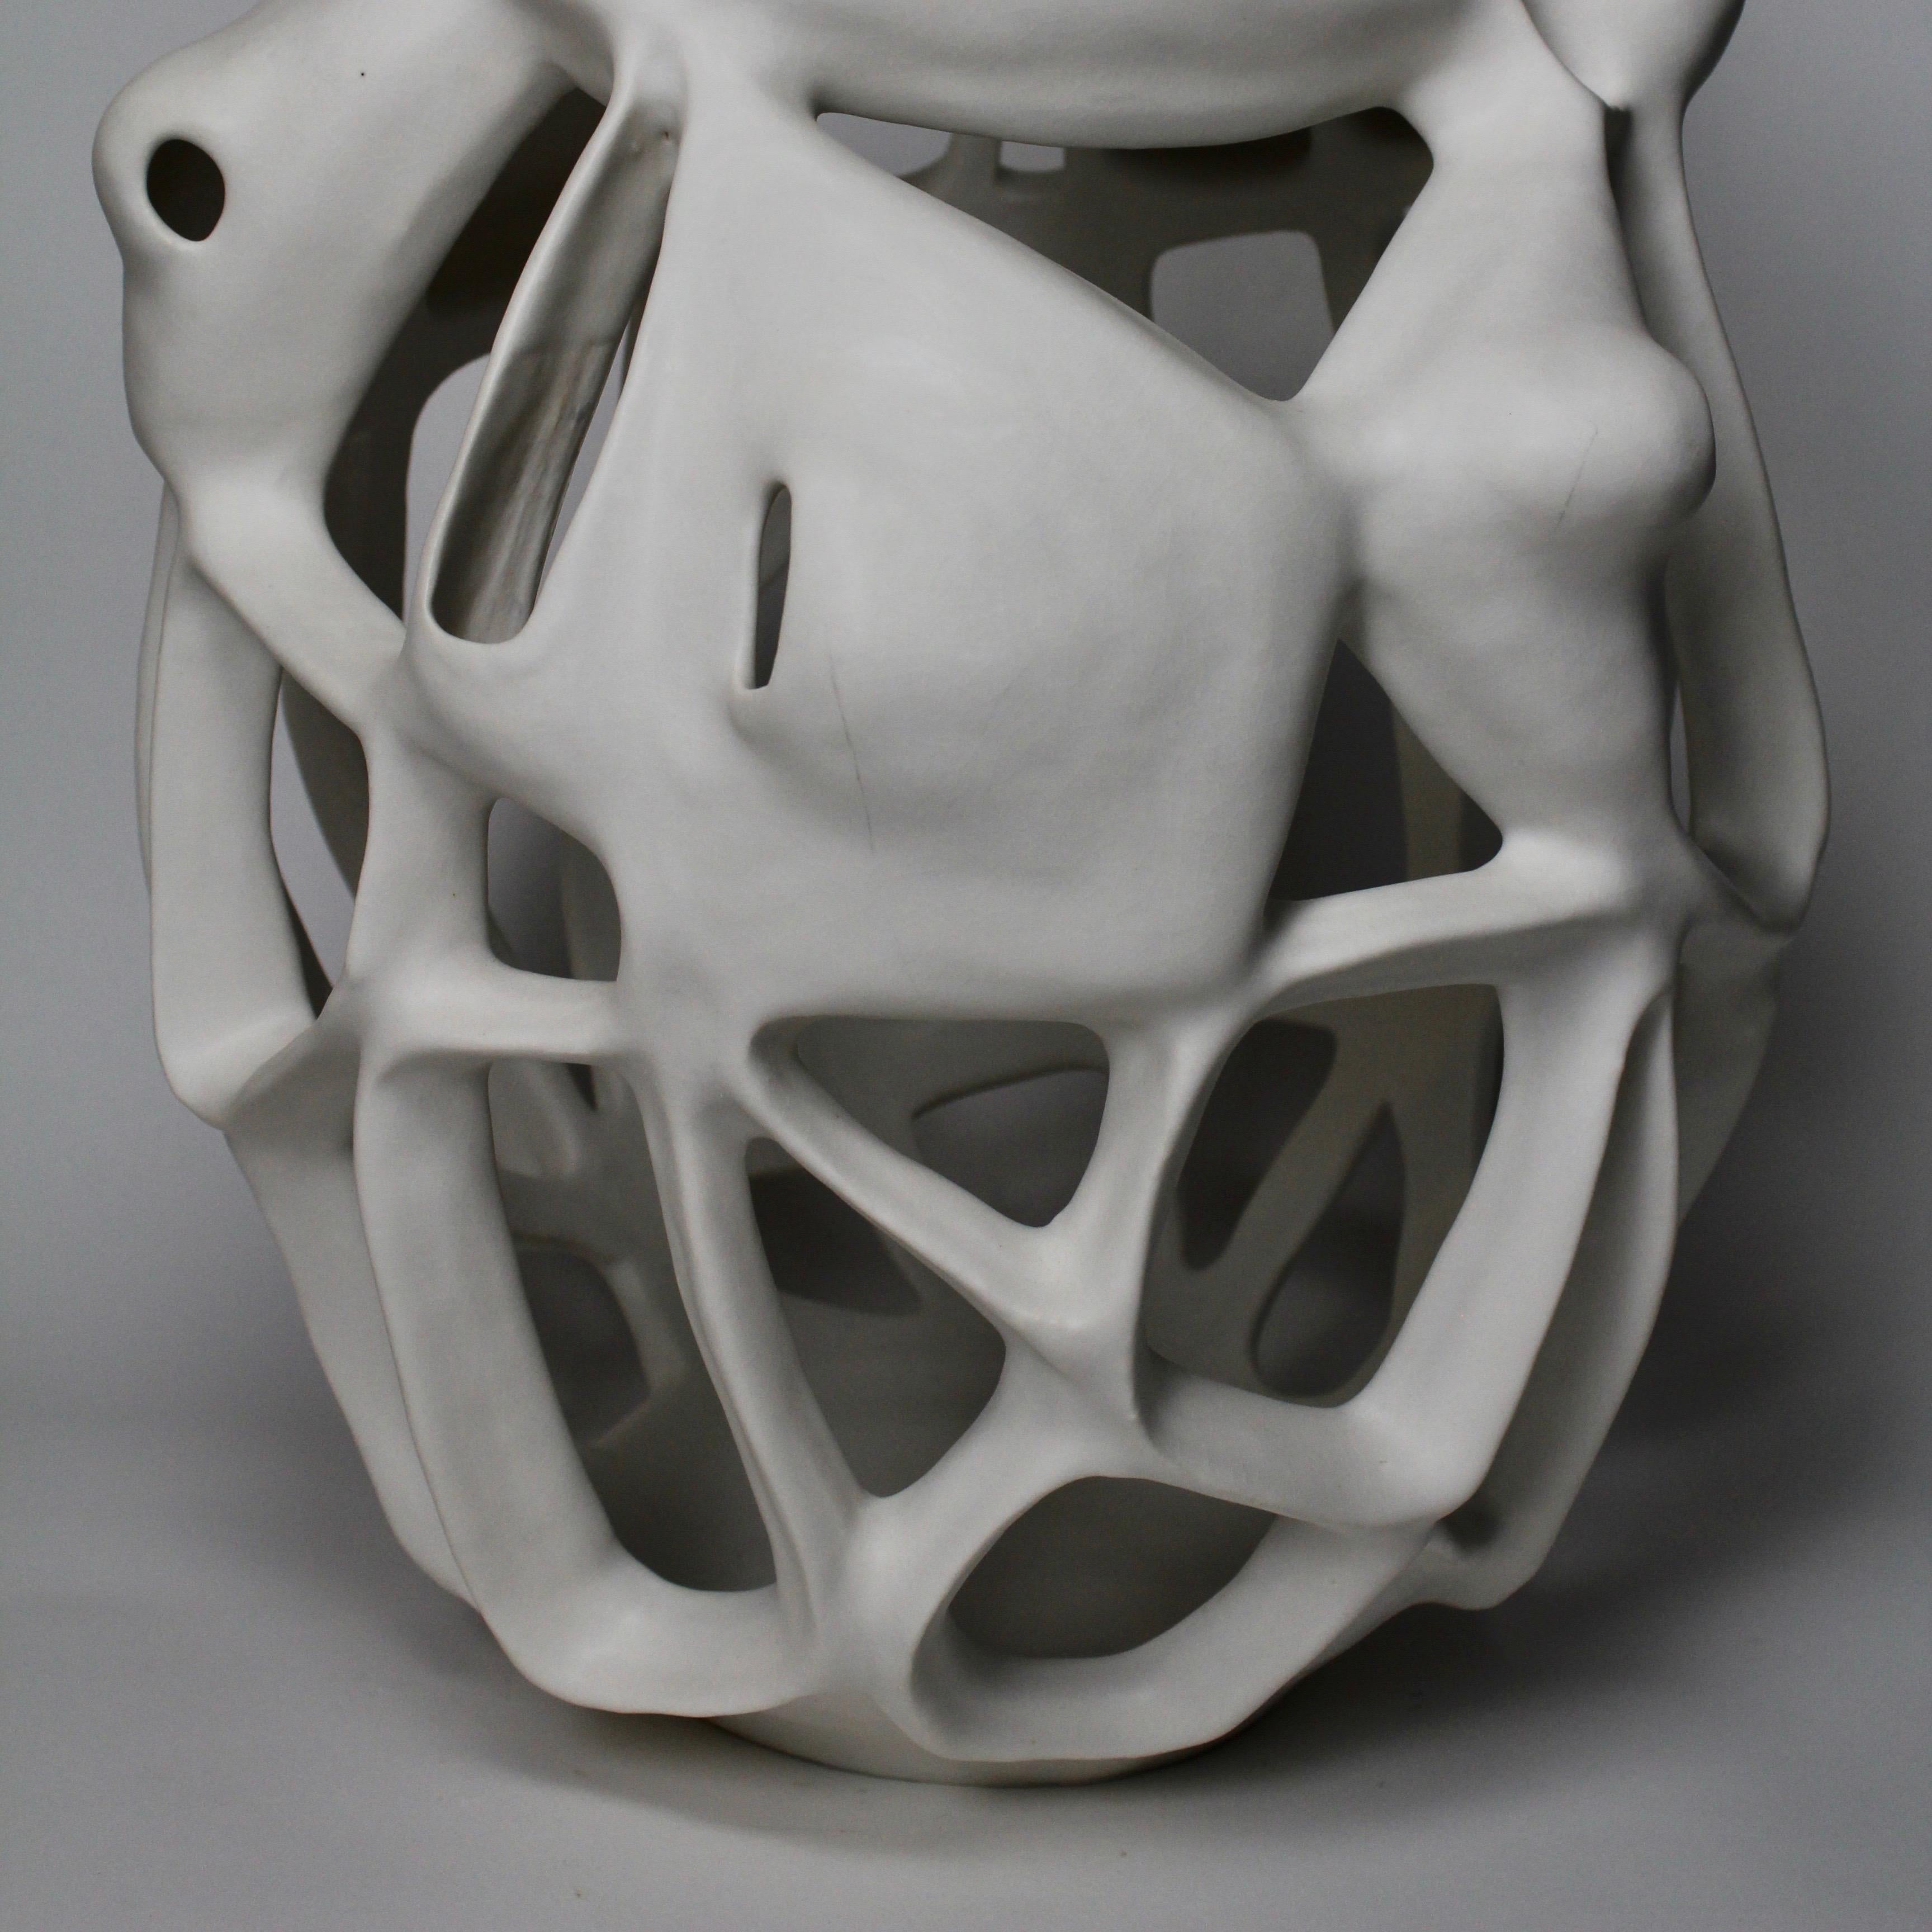 Untitled #3780 - Porcelain geometric white sculpture  - Contemporary Sculpture by Joan Lurie